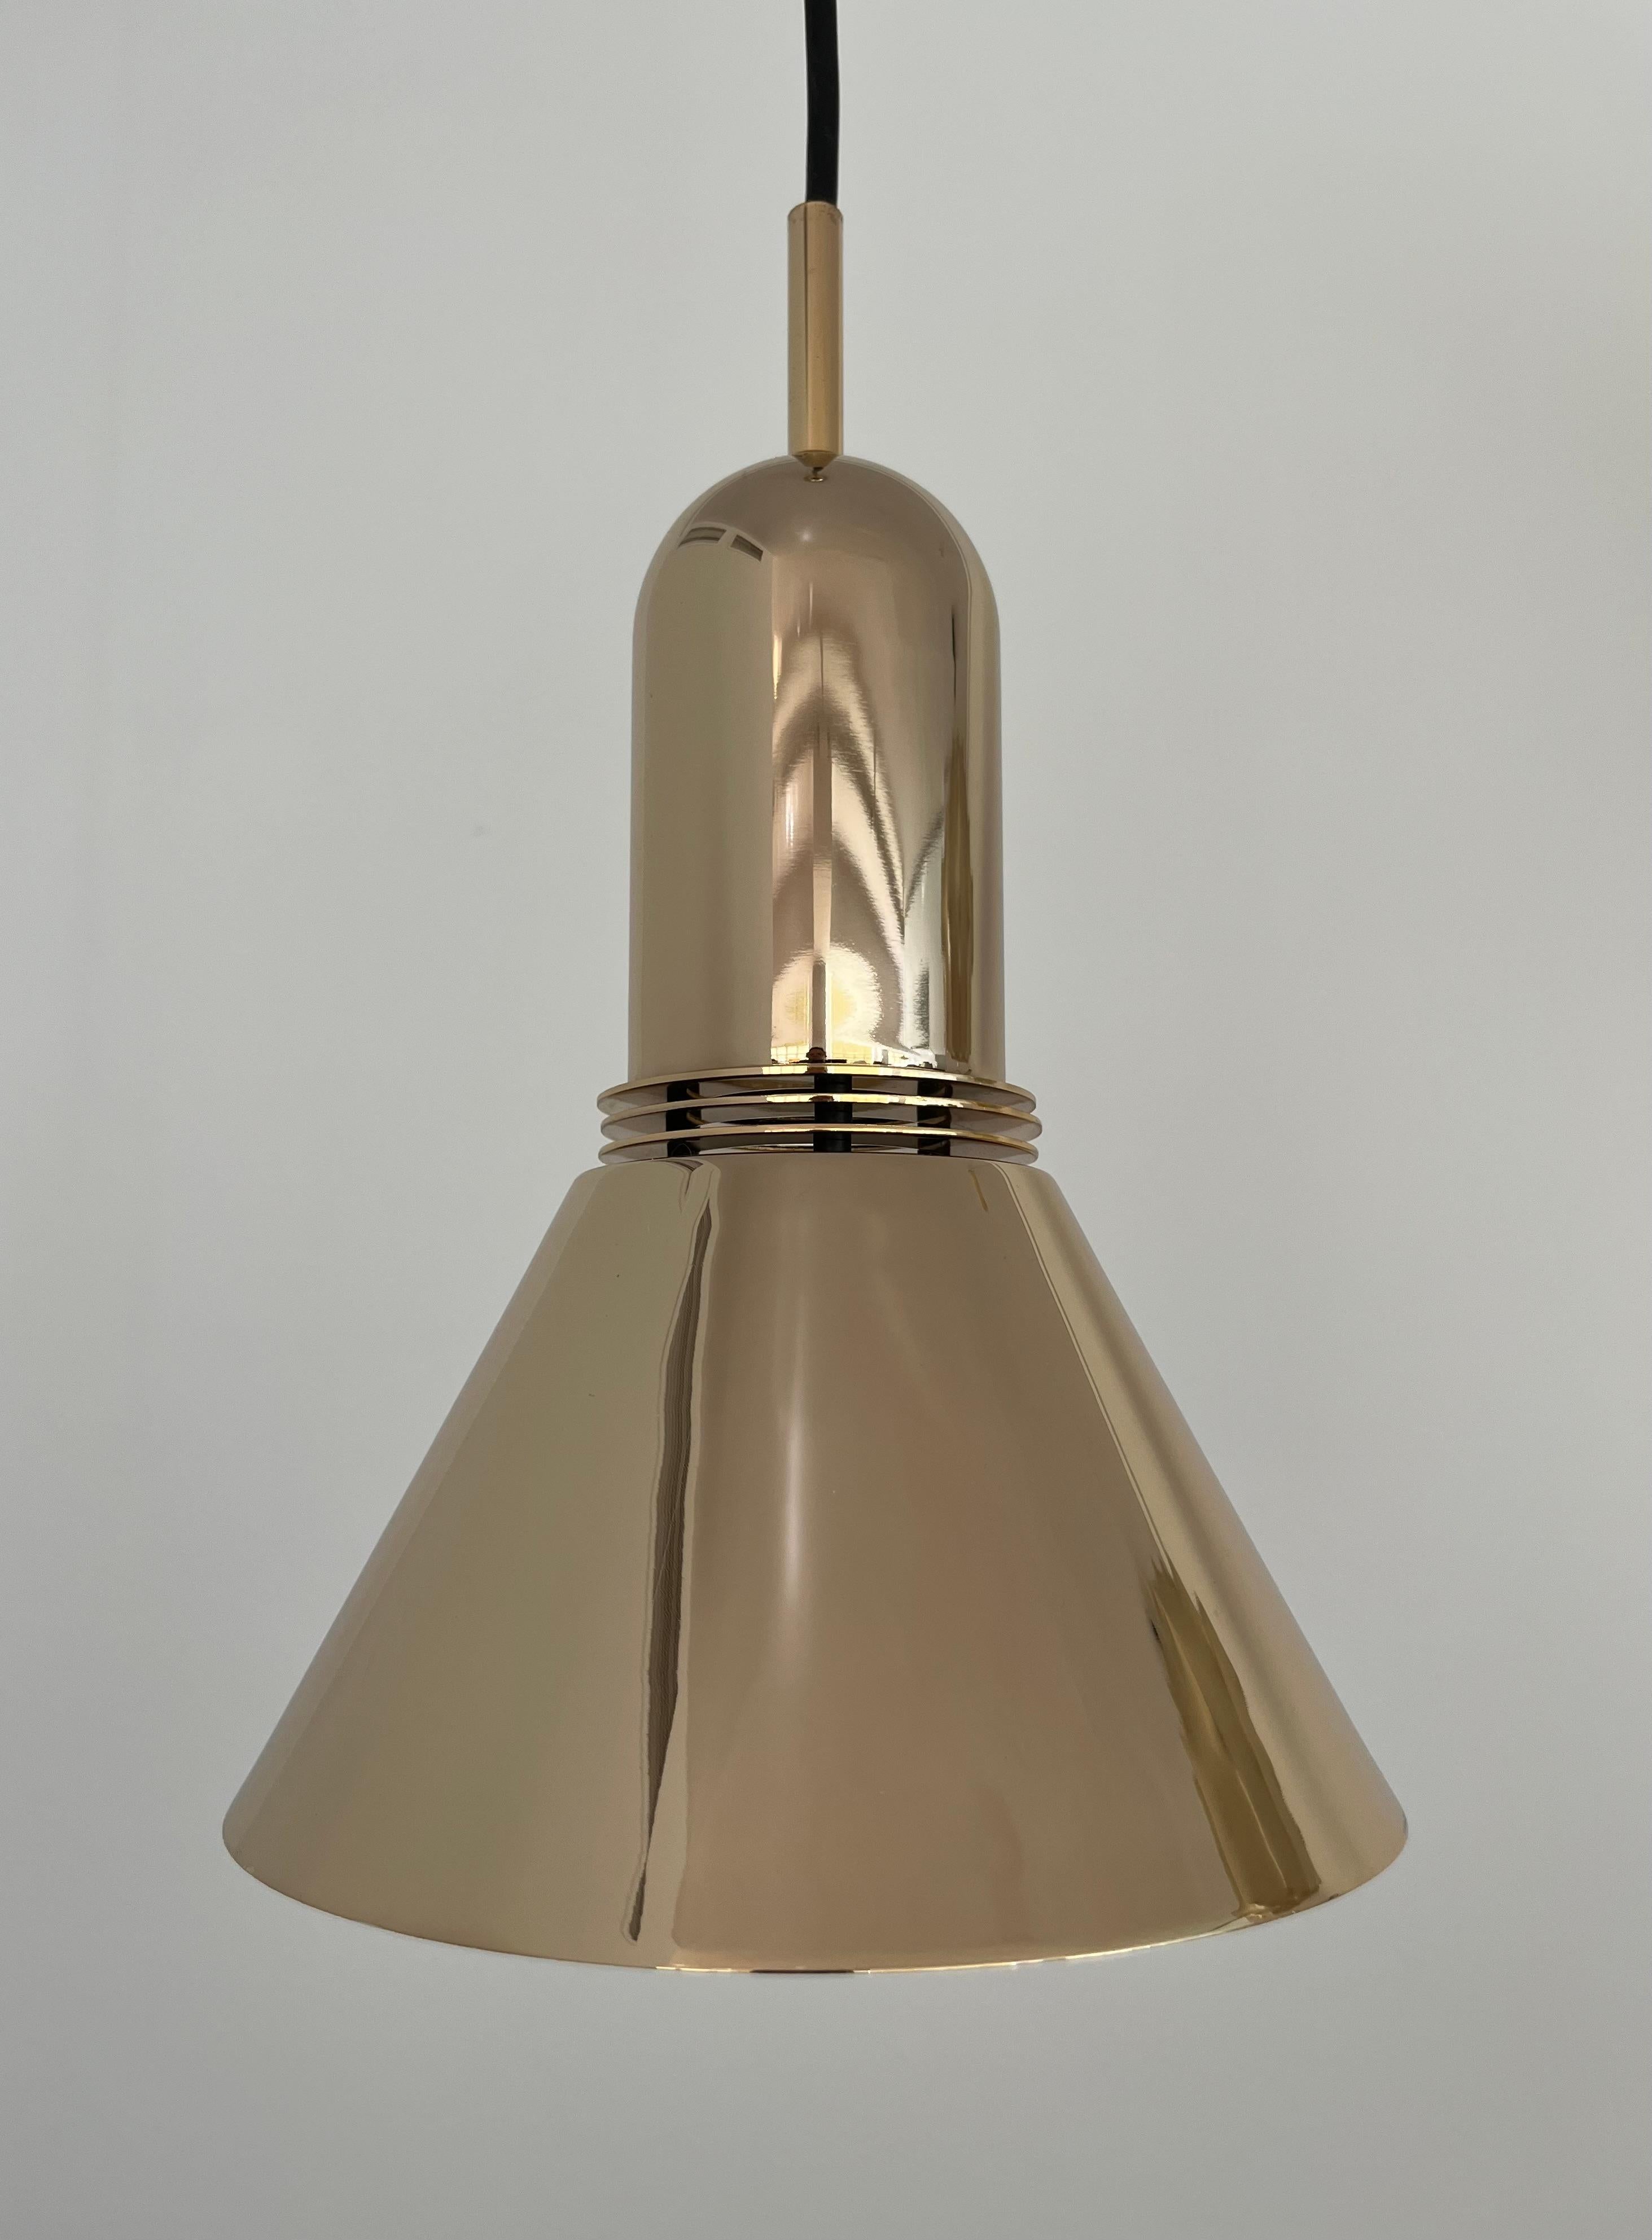 Beautiful and unique Mid-Century Set of Three of Gold Long Chandeliers by Leonardo Marelli for Estiluz. Model: T-1142 Dorado (golden). These fixtures were designed and manufactured in Barcelona (Spain) during 1970s. Exterior: Chrome plating in gold